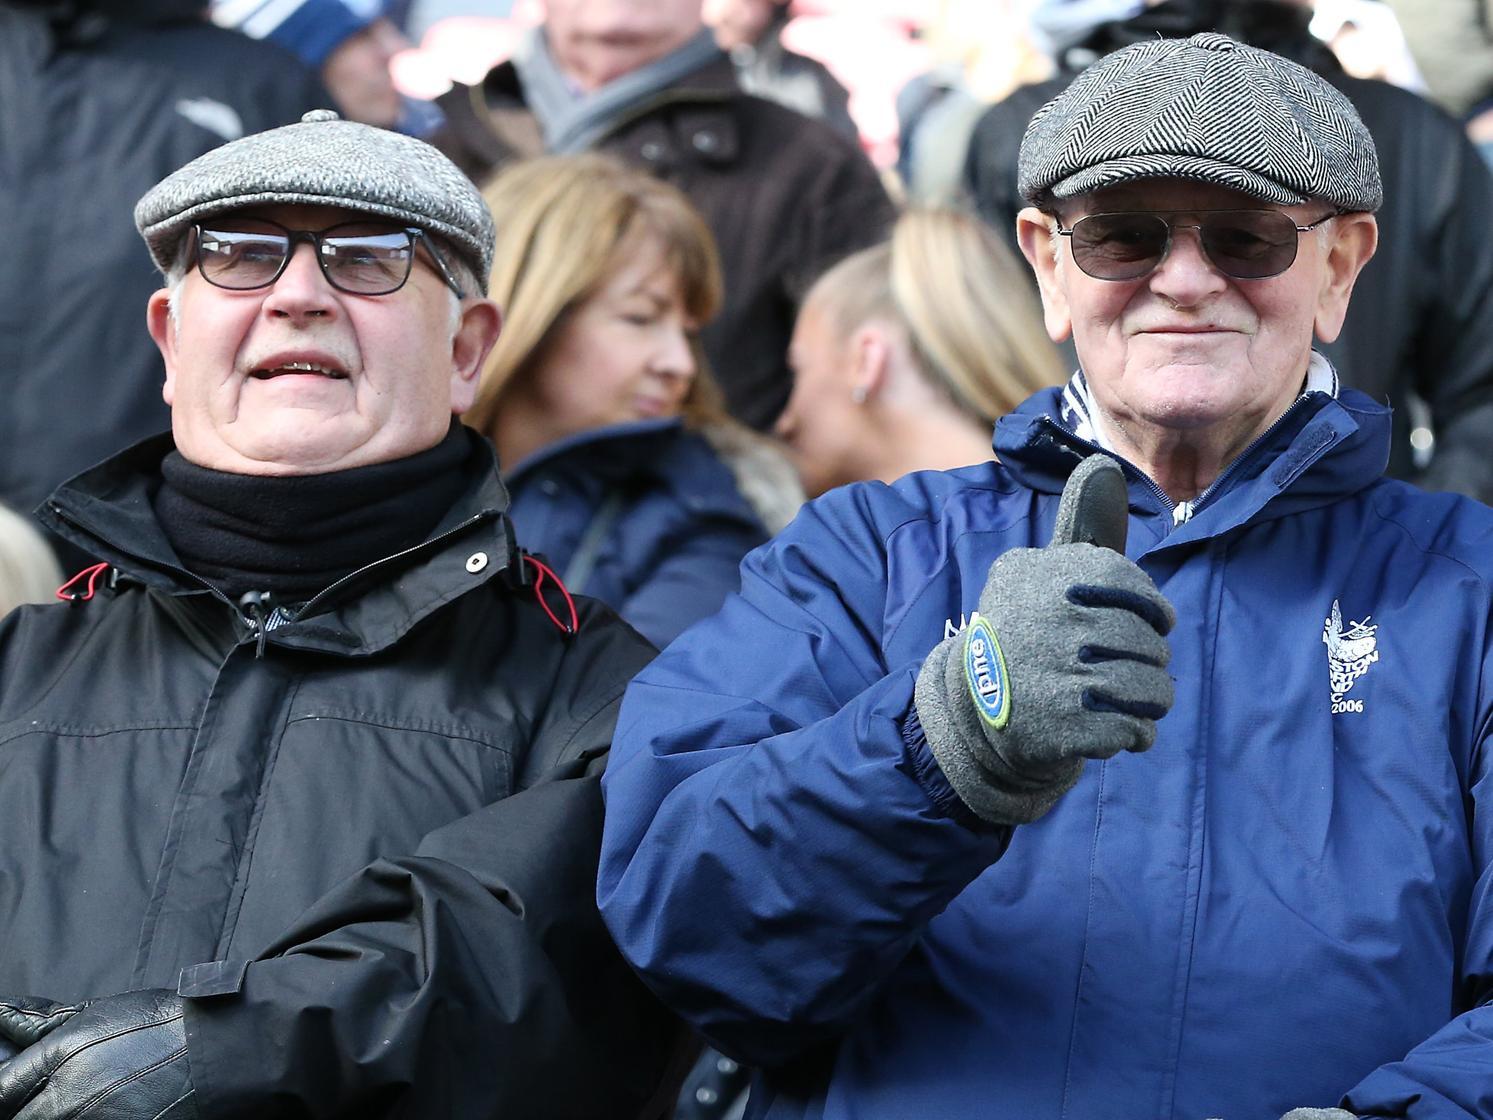 It's all good from one fan, as a pair sit ready for the derby to begin.